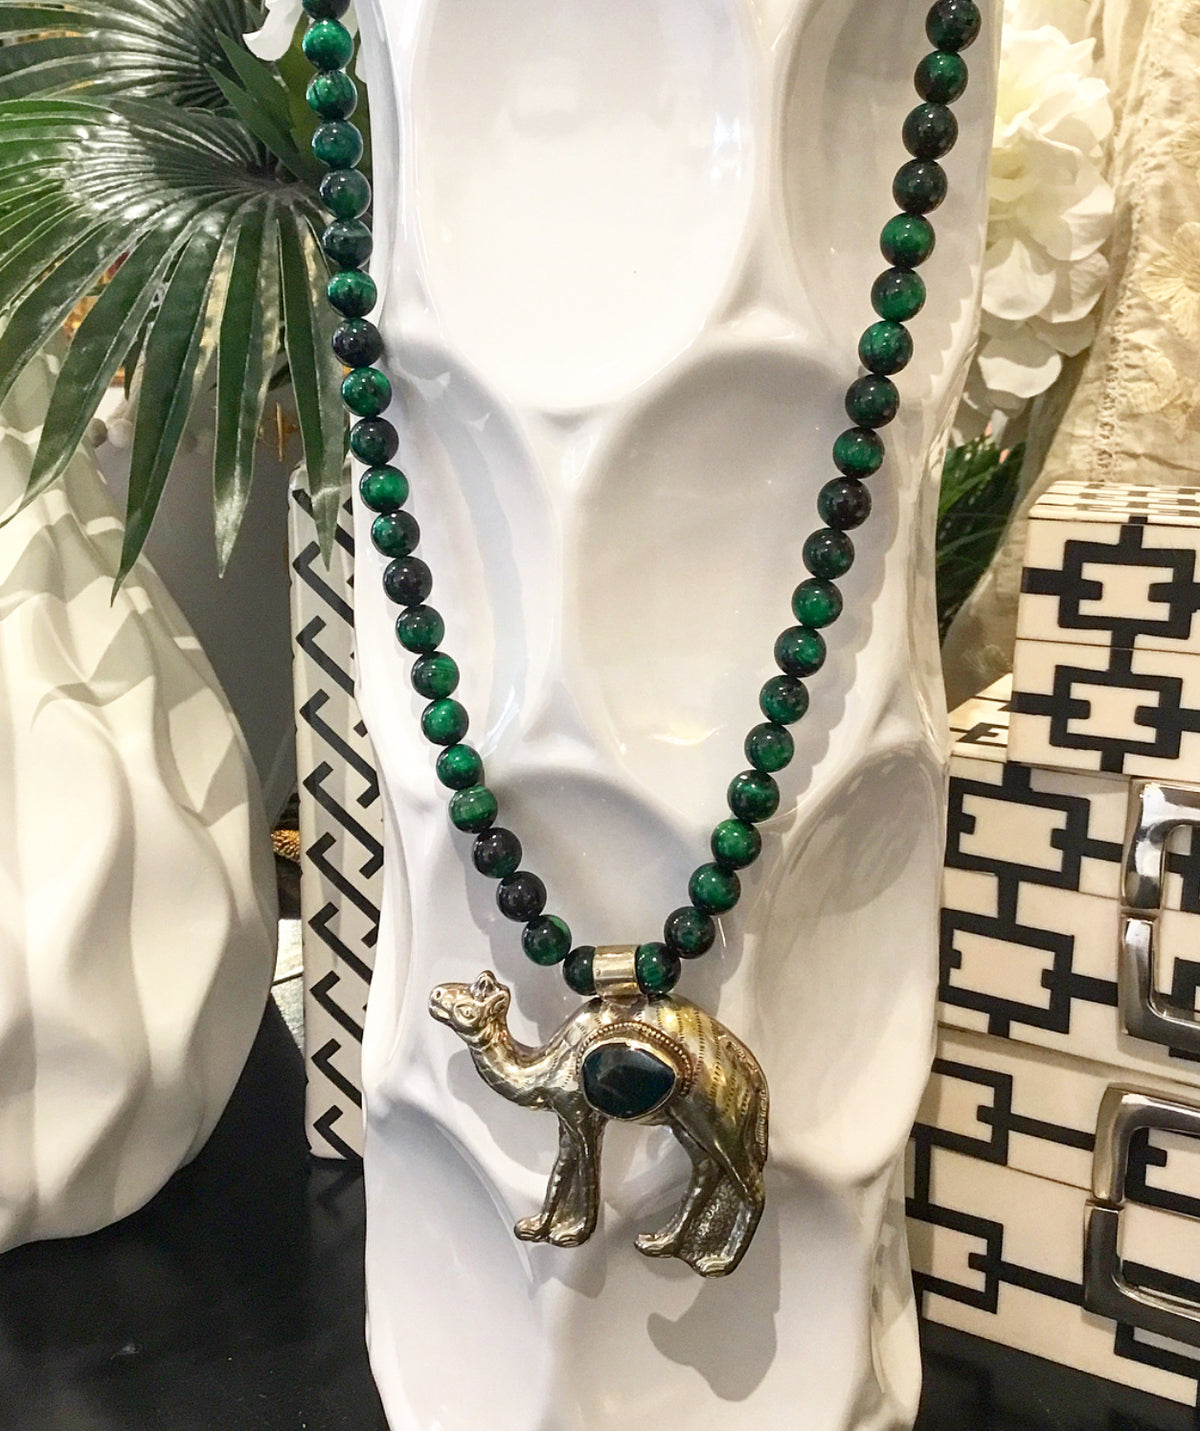 Chic Peek: The Gorgeous, New Teramasu Verdite Necklace with One-of-a-Kind Camel Pendant